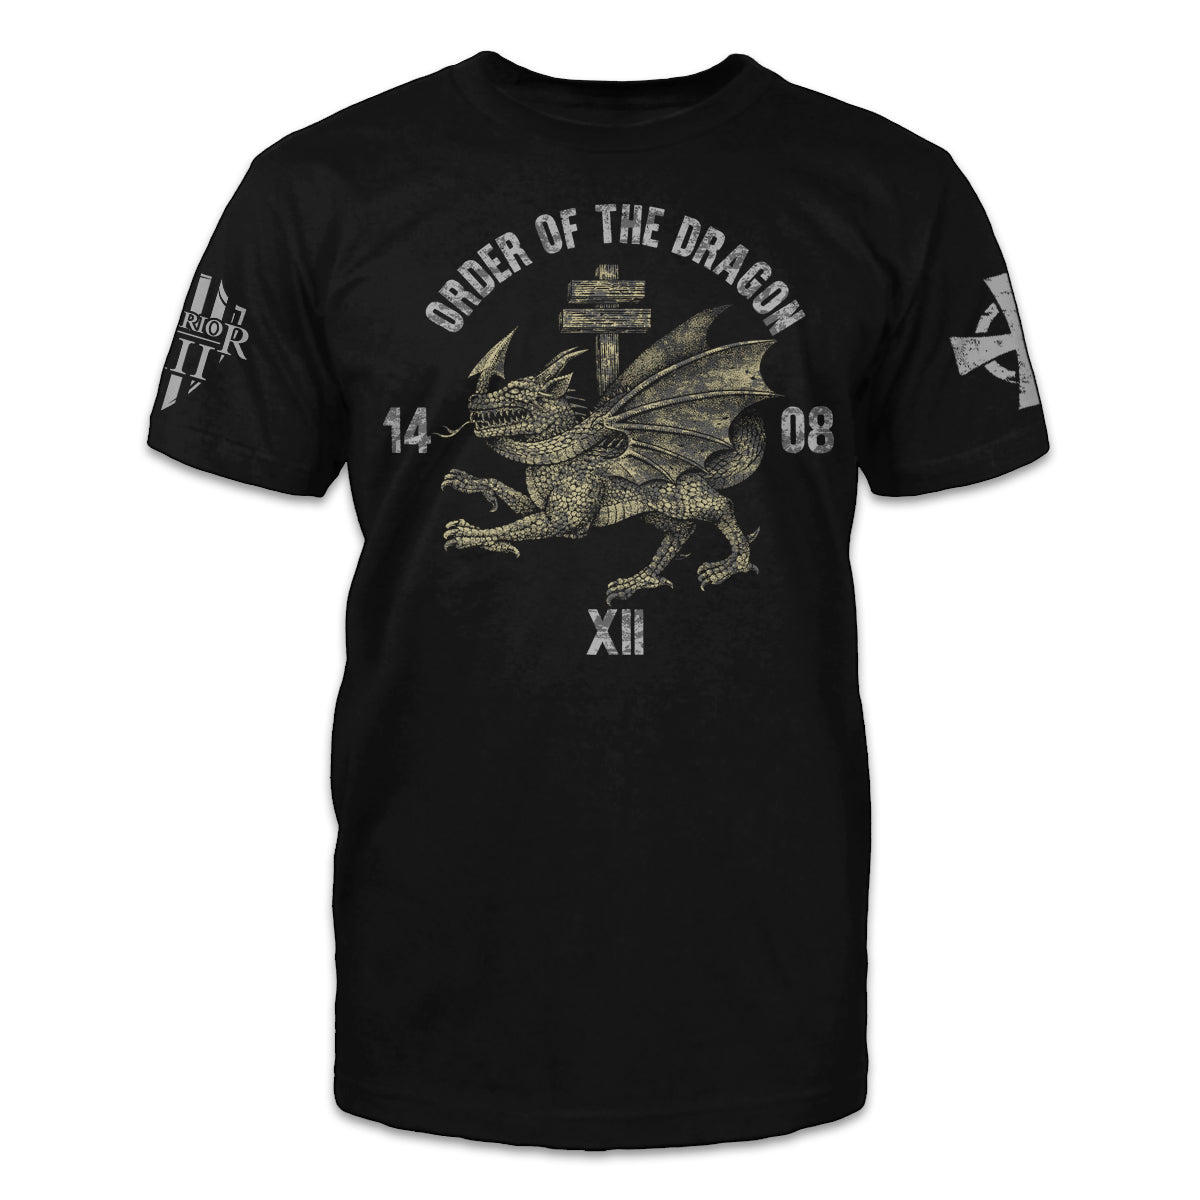 A black t-shirt with the words "Order of the dragon" with a dragon printed on the front.